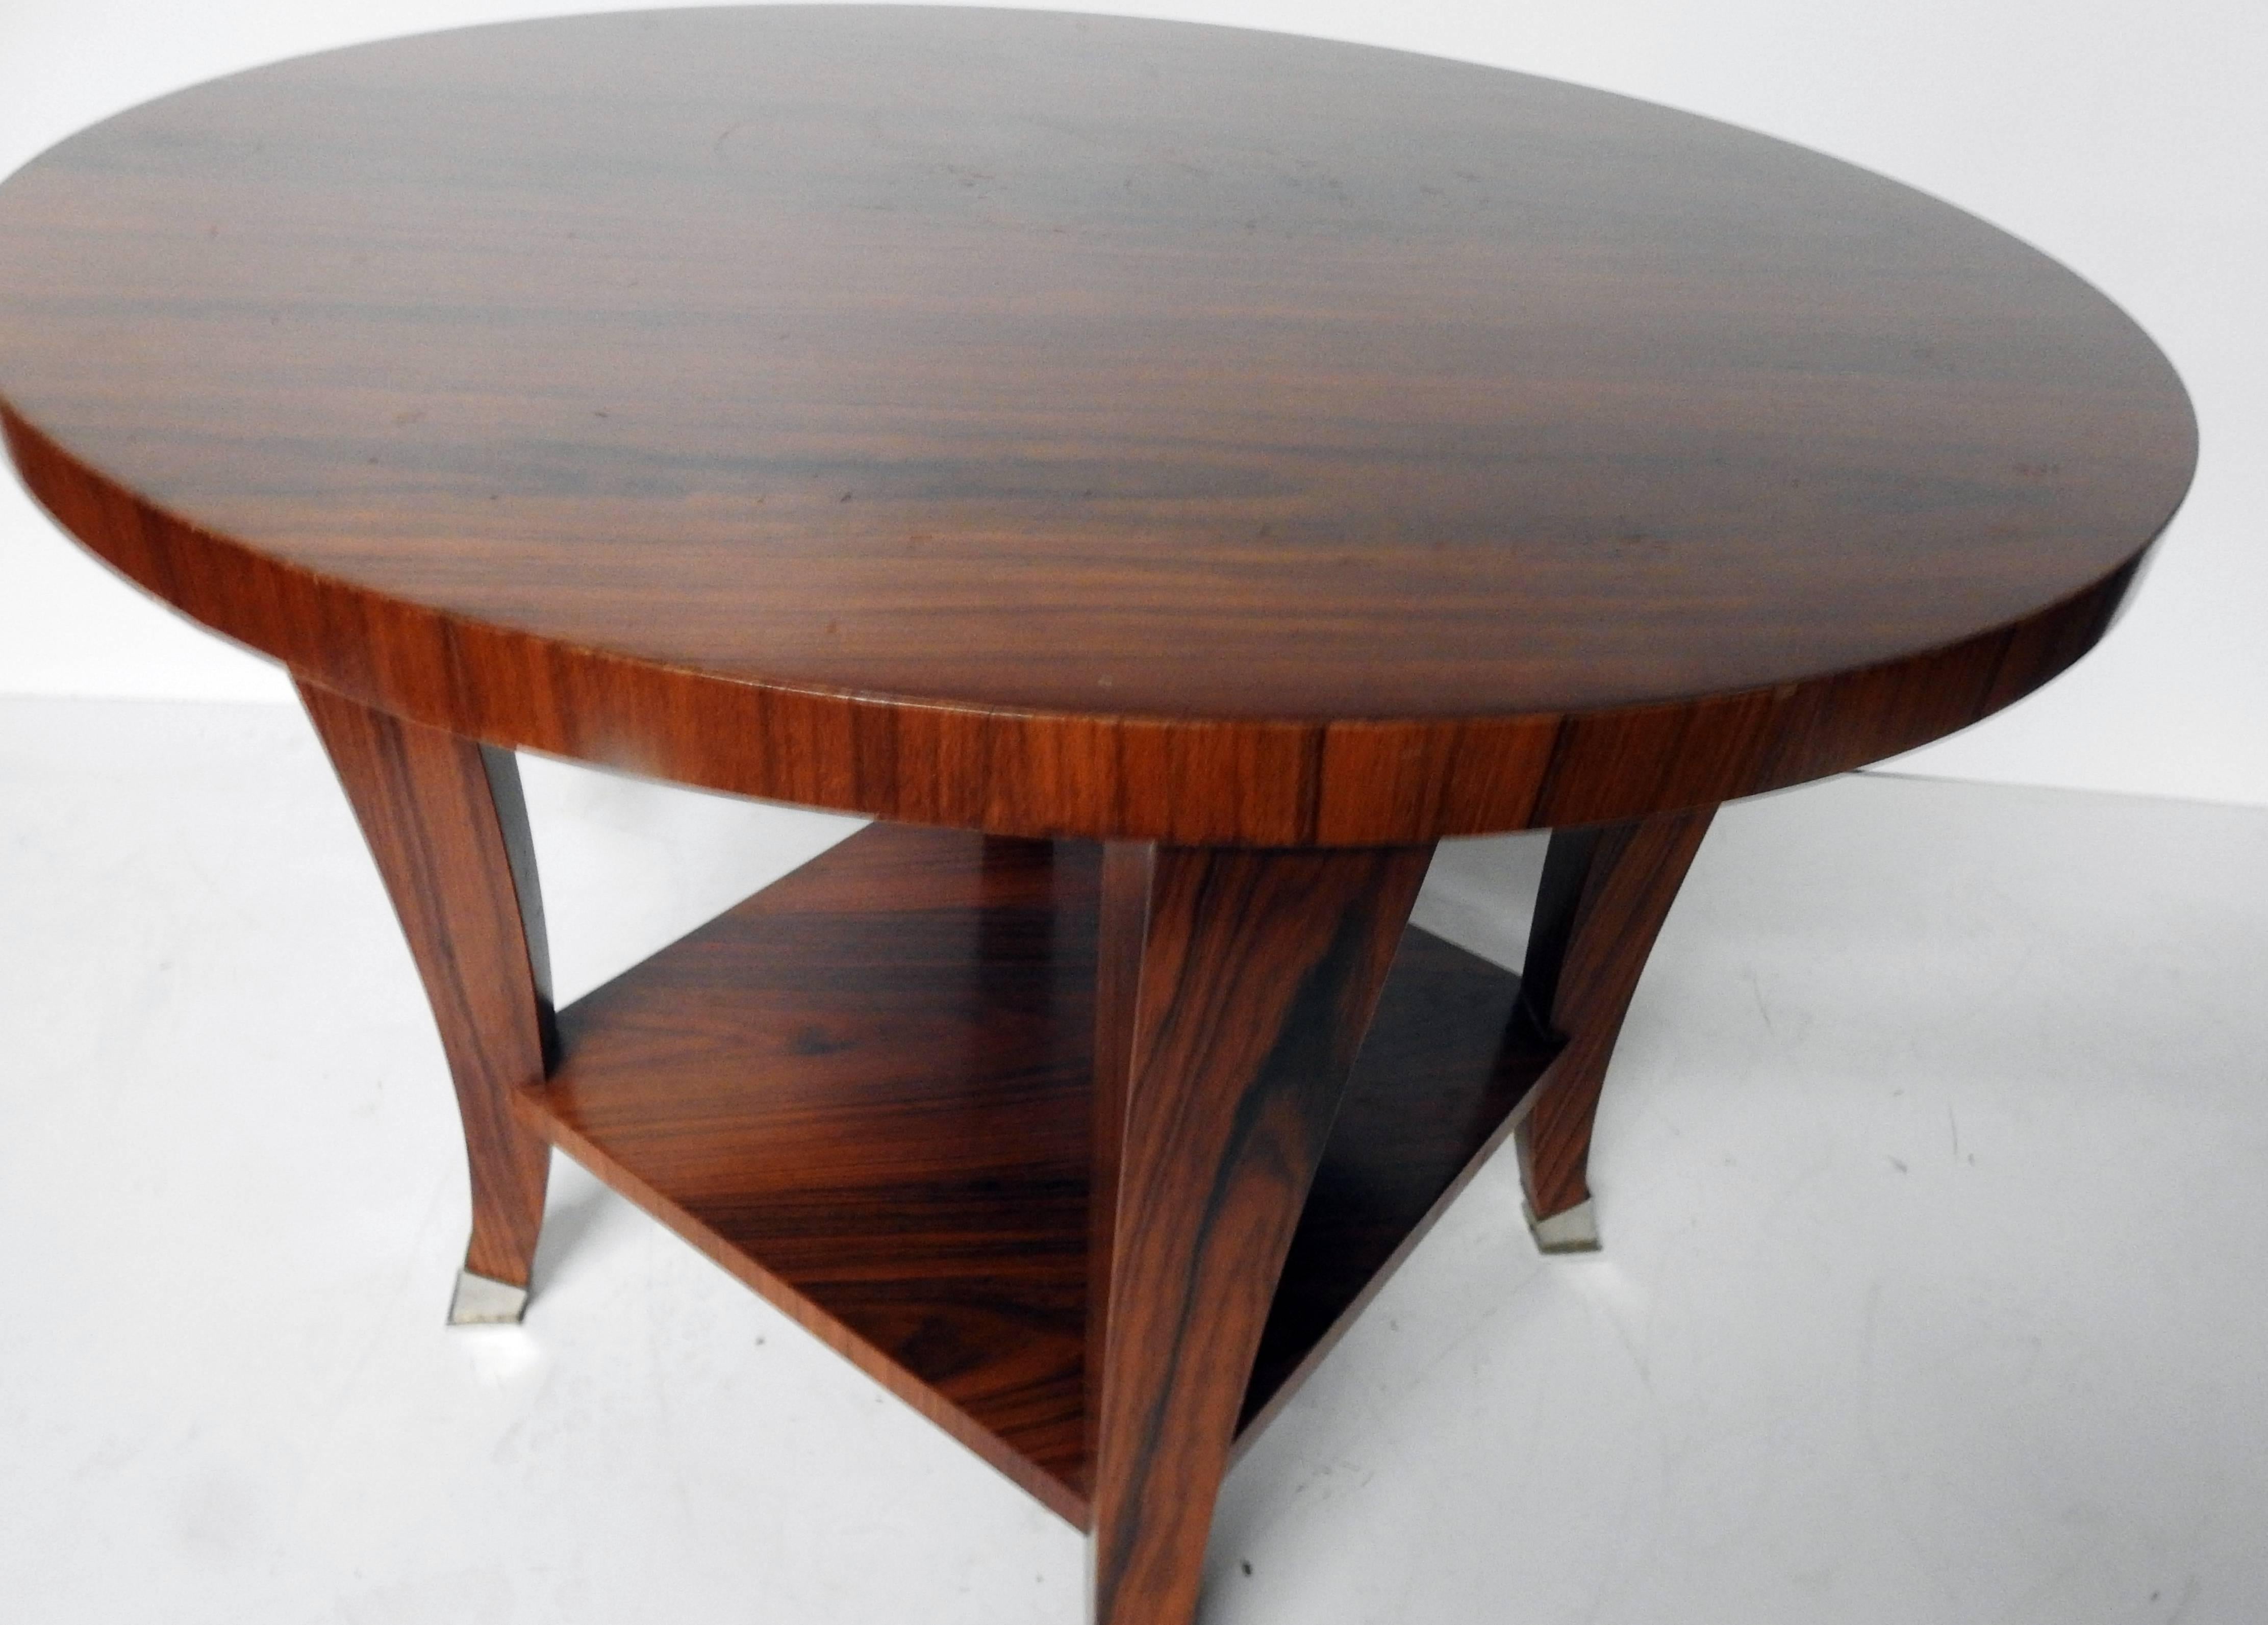 Art Deco style table by Barbara Barry for Baker Furniture.